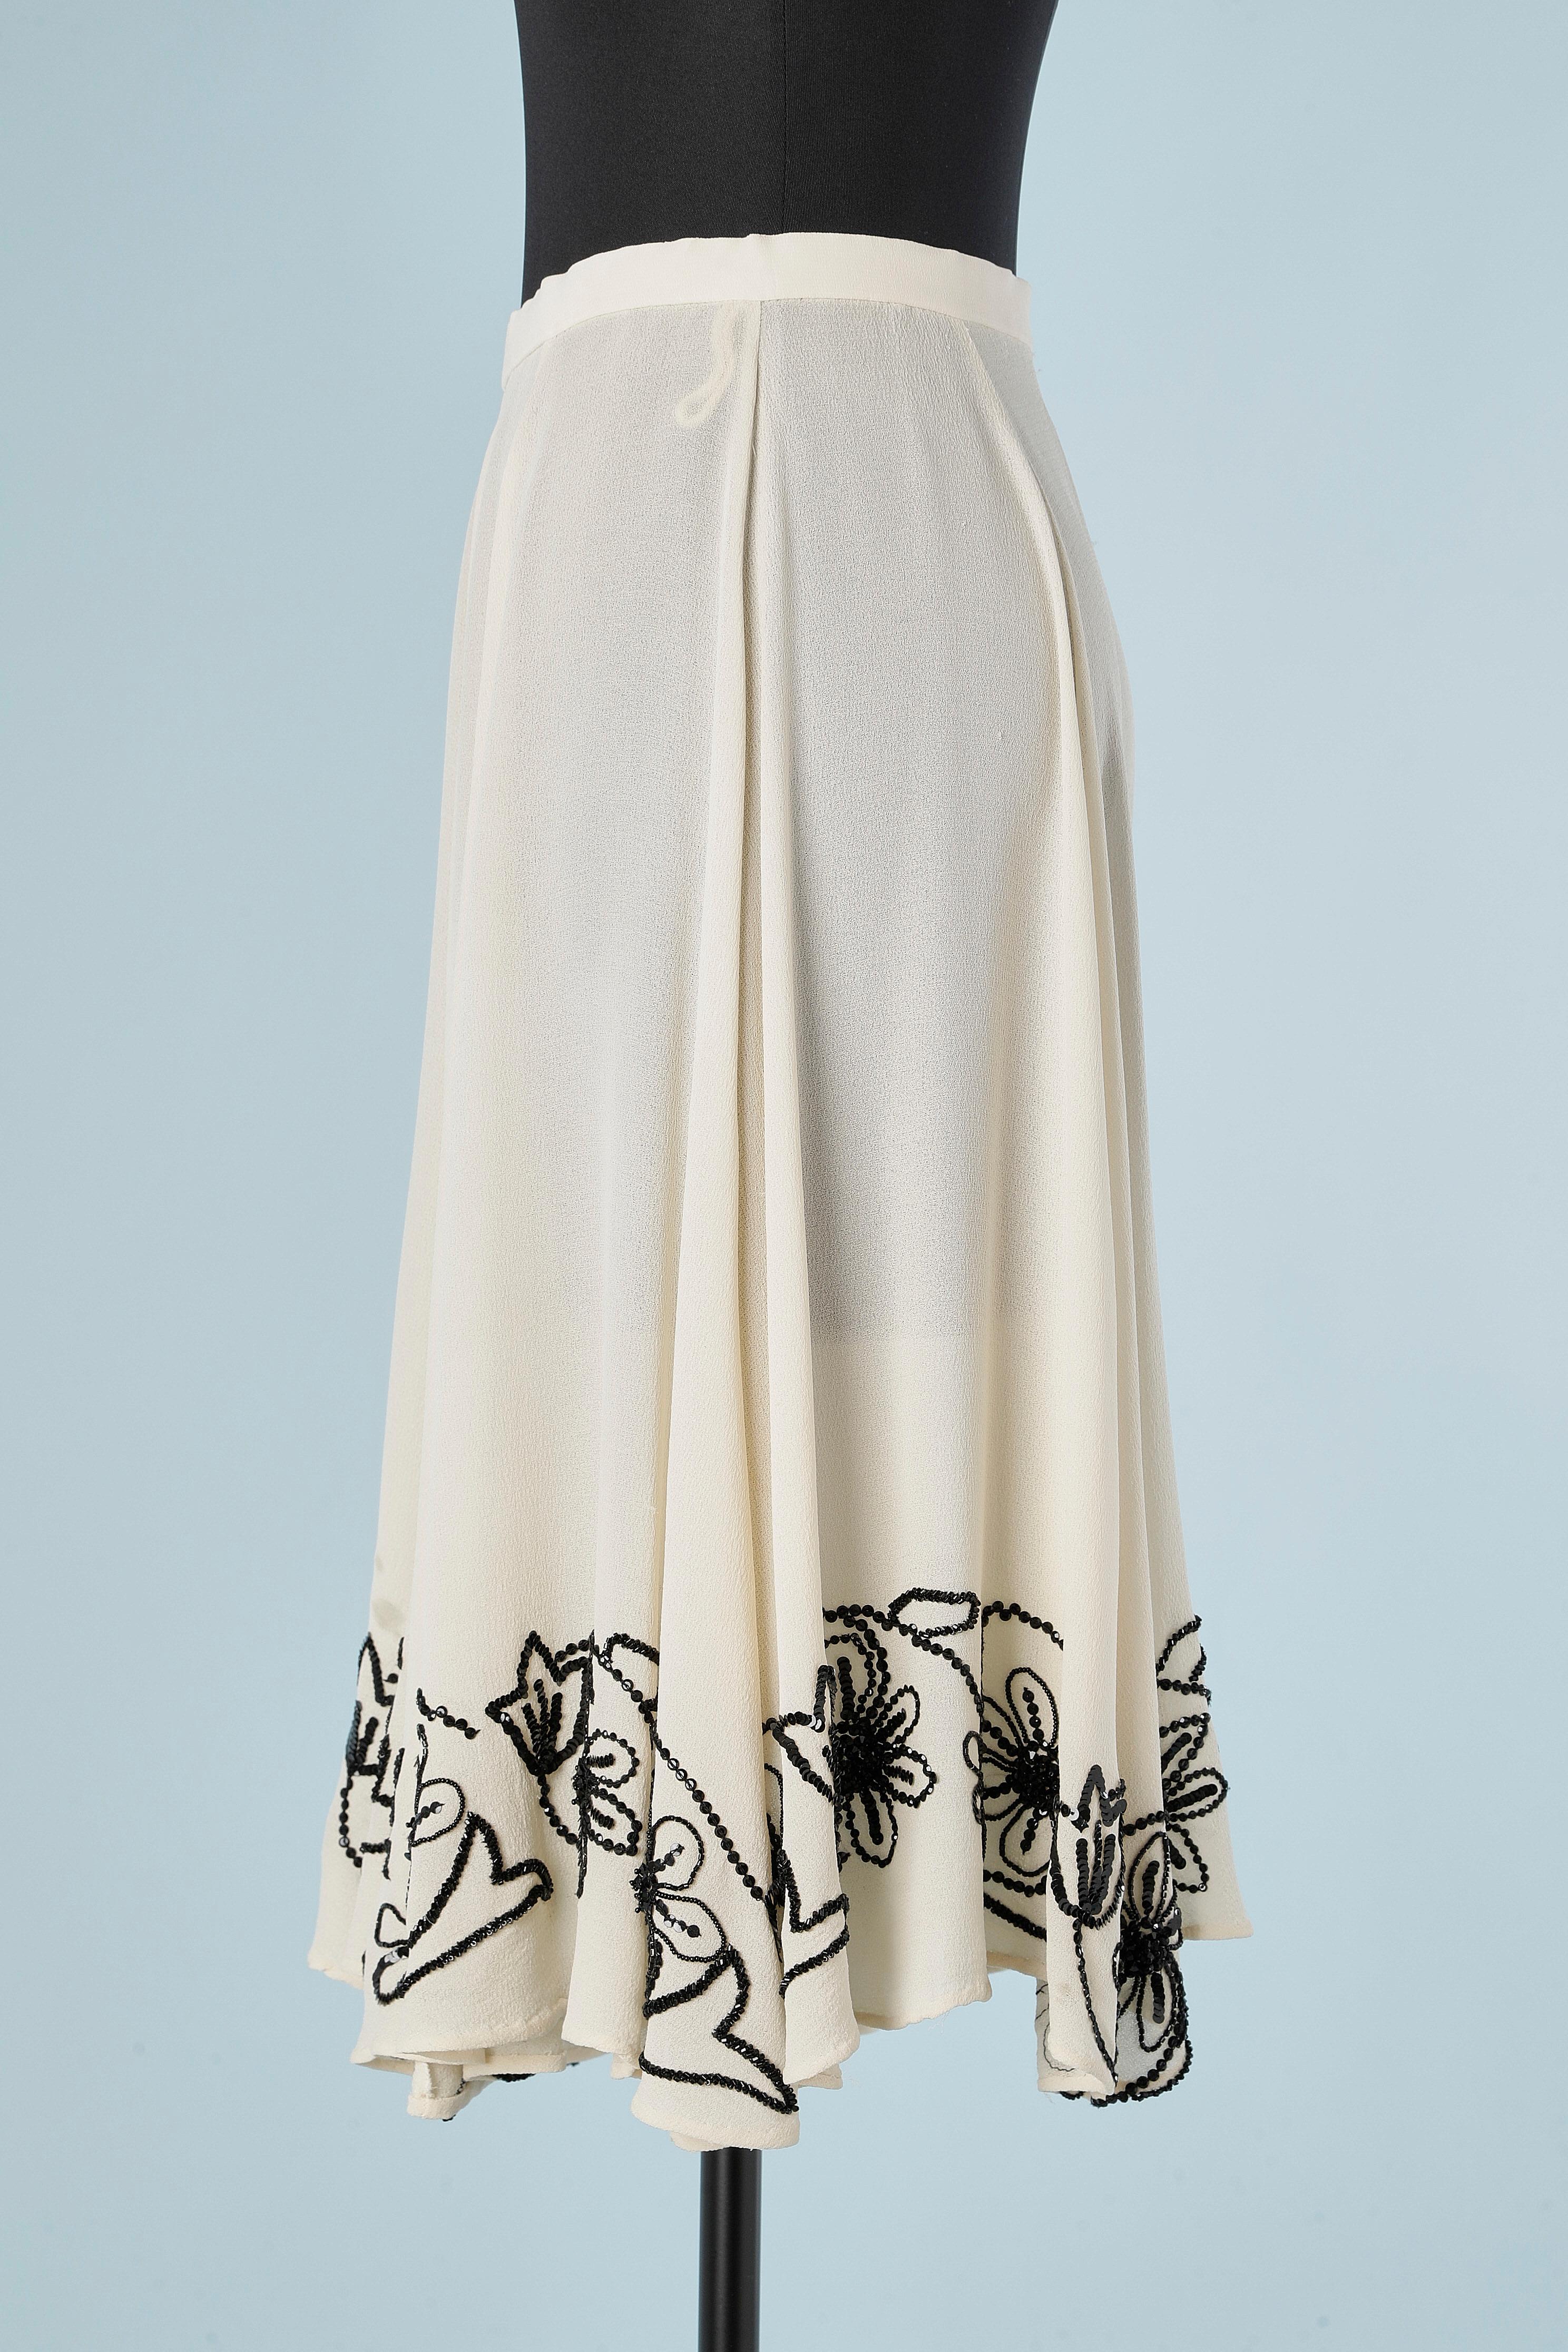 Women's Off-white ilk chiffon skirt with black beads and sequins embroideries  Rochas  For Sale